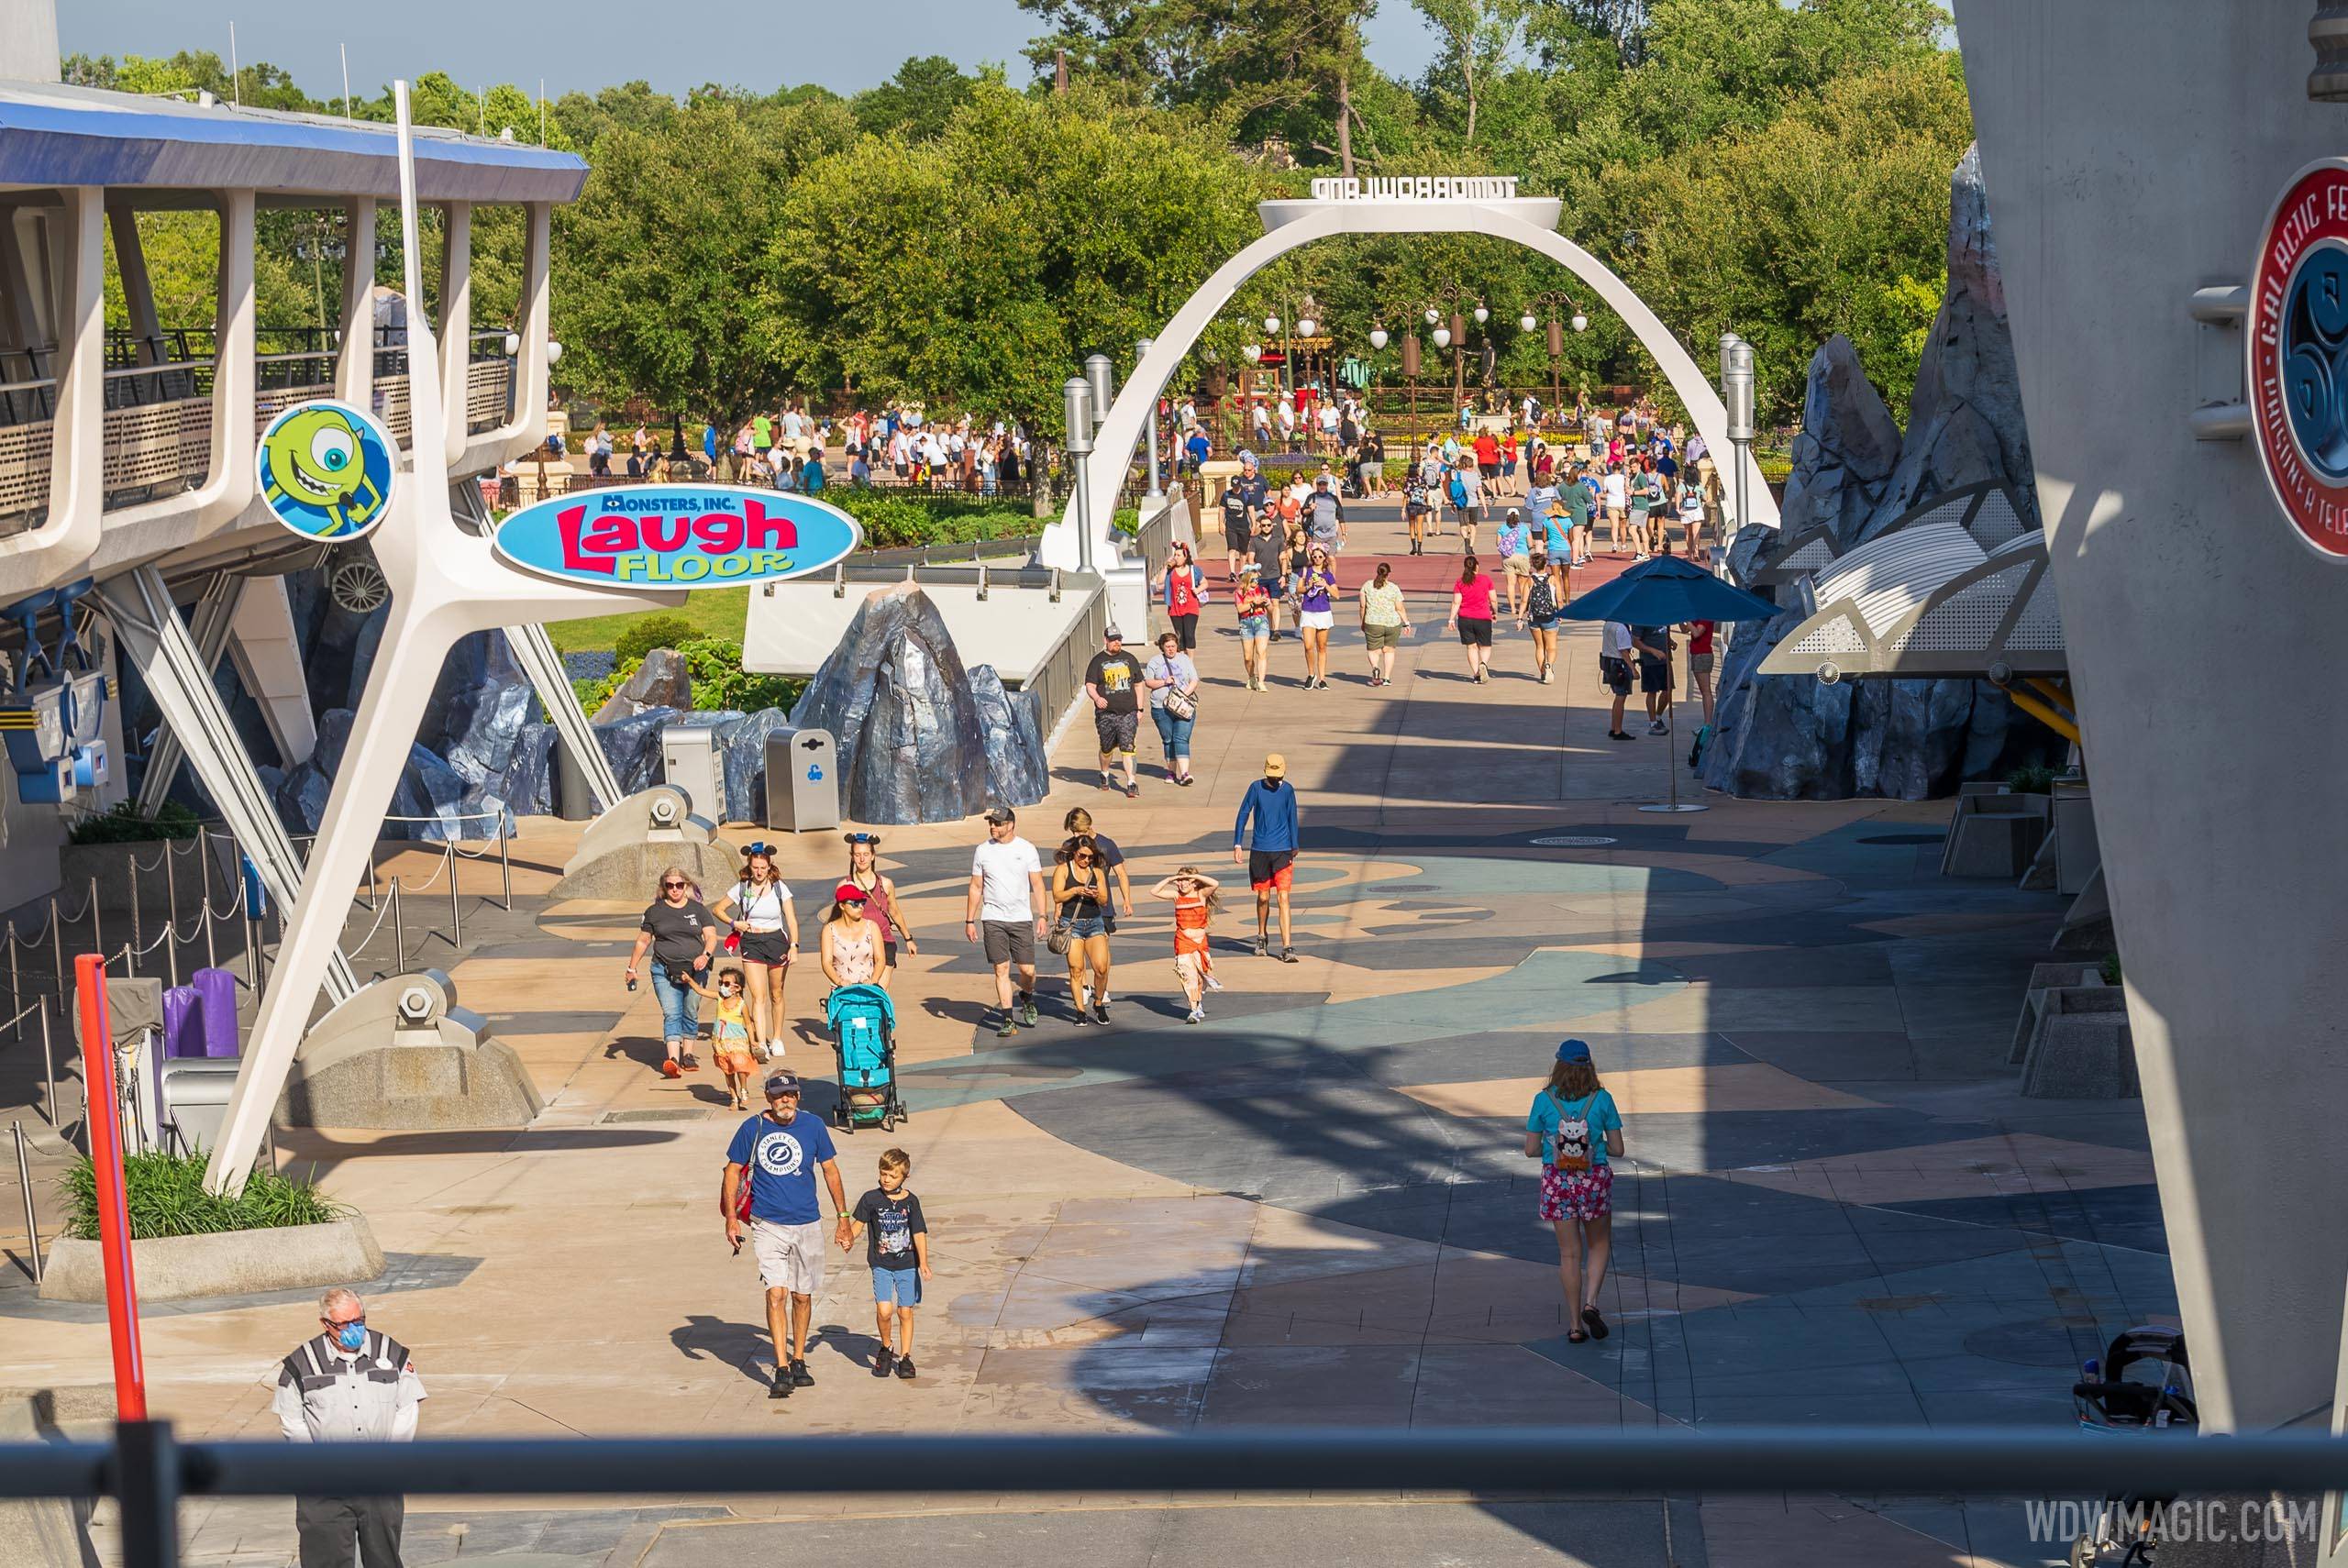 New look coming to the main walkway in Tomorrowland at the Magic Kingdom